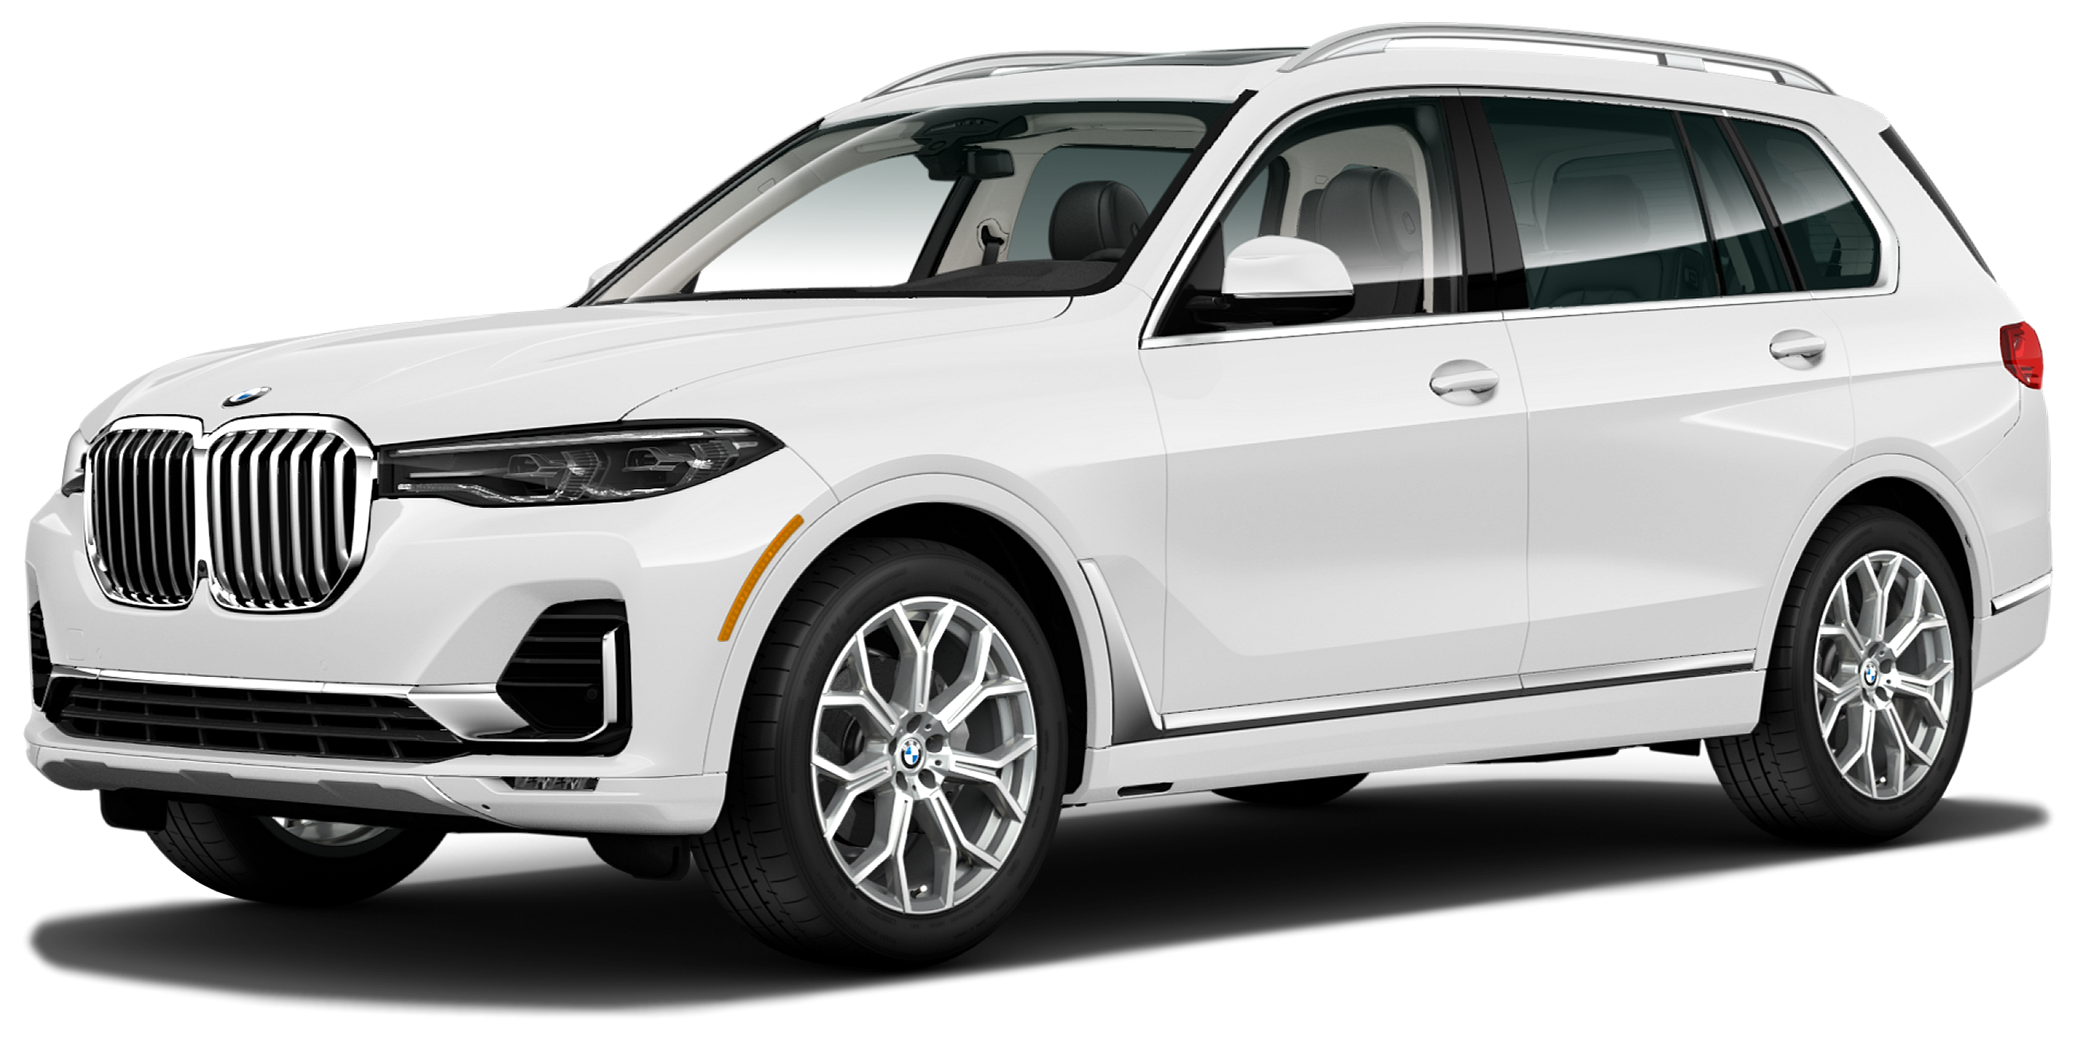 2021-bmw-x7-incentives-specials-offers-in-roanoke-va